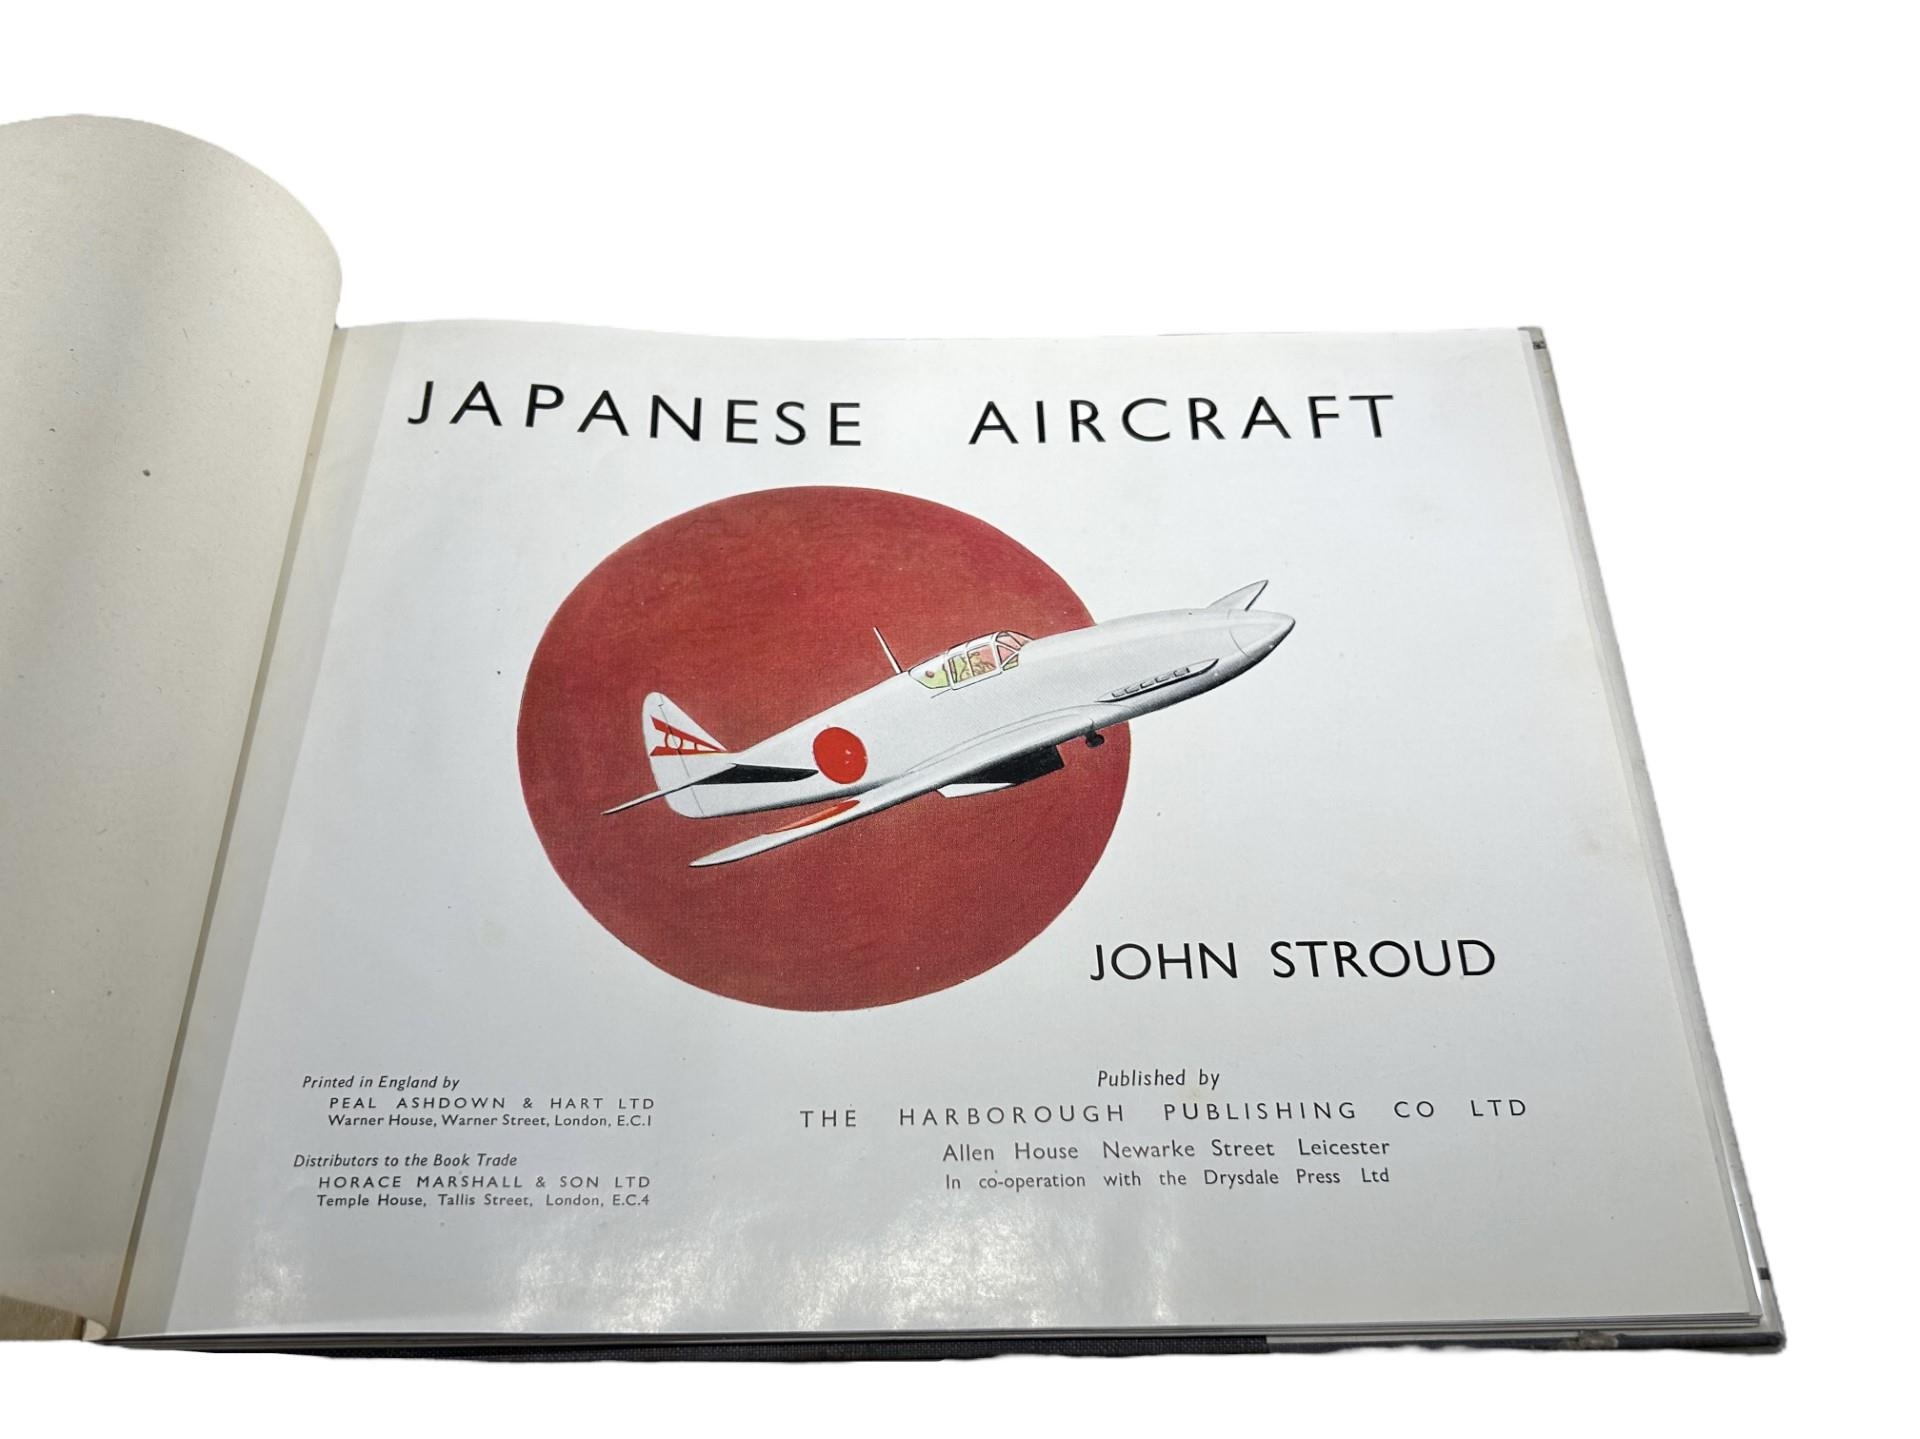 AVIATION INTEREST. A 1945 JAPANESE AIRCRAFT BOOK BY JOHN STROUD. PUBLISHED BY THE HARBOROUGH - Bild 2 aus 4